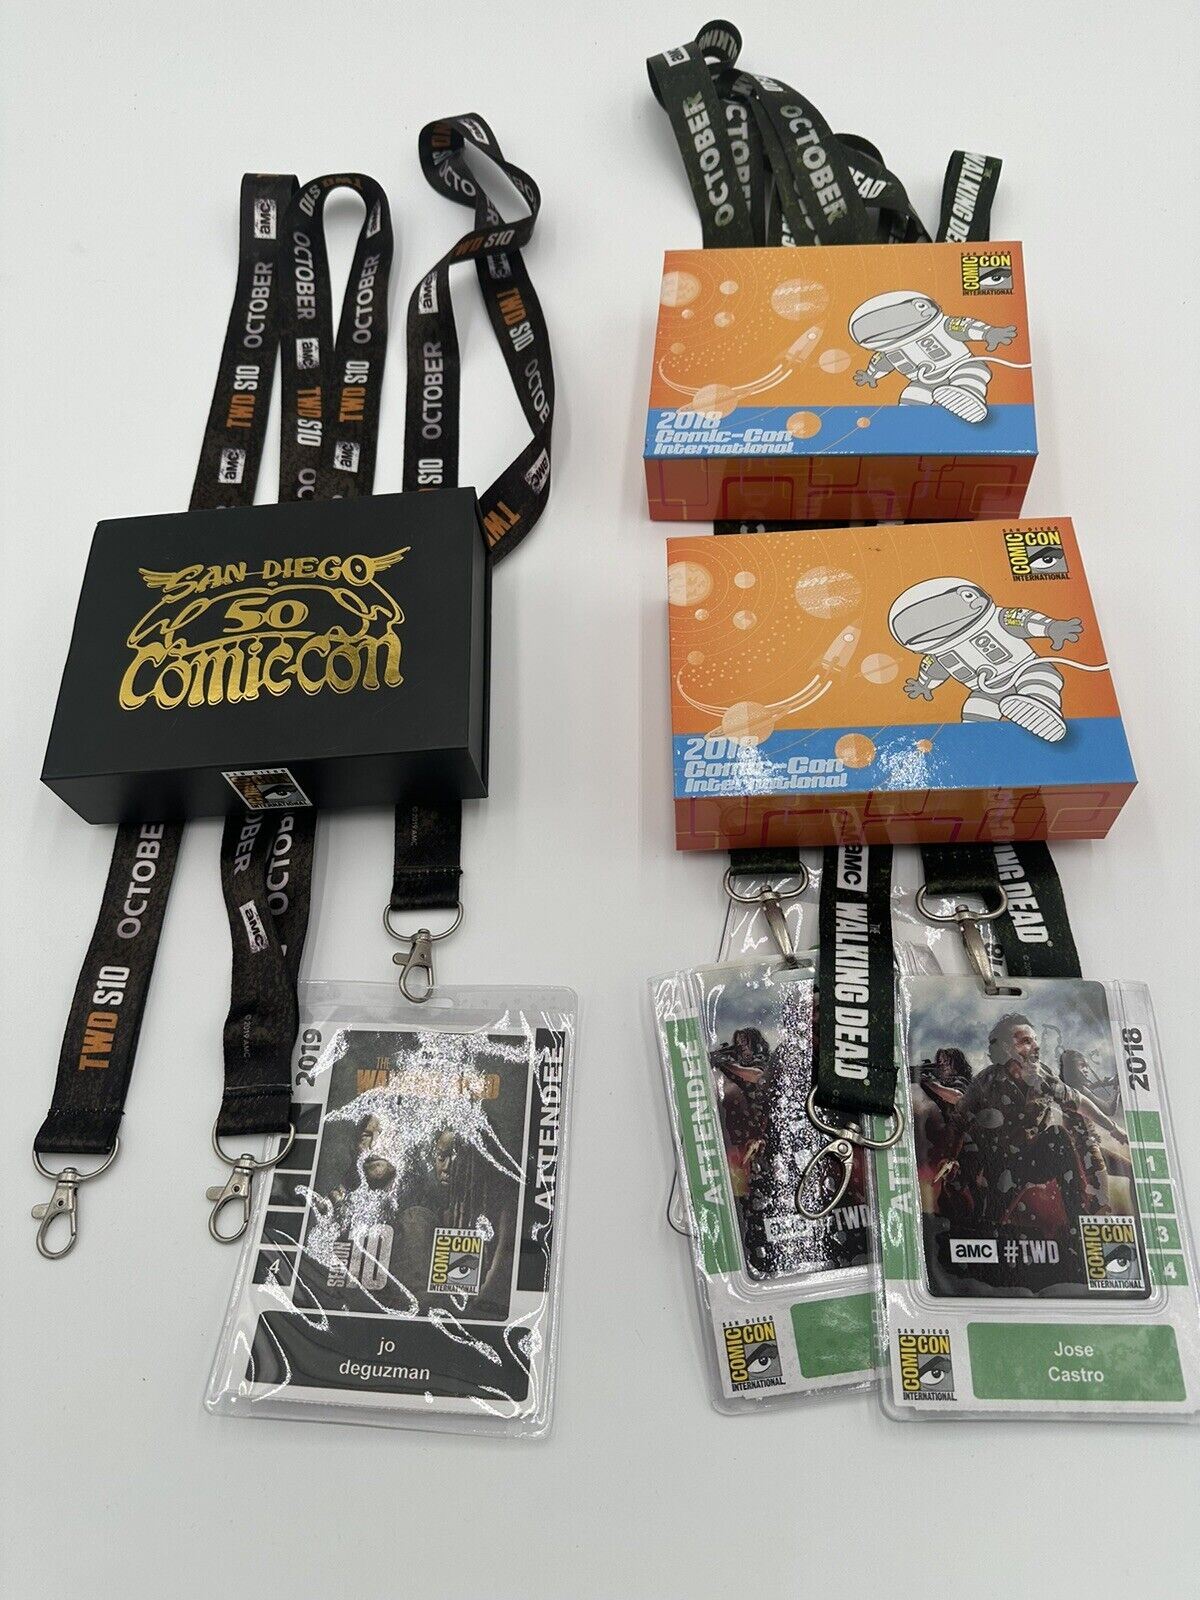 SDCC 2018-19 AMC The Walking Dead Comic Con Lanyard Welcome BOX, PIN, BOOKLET